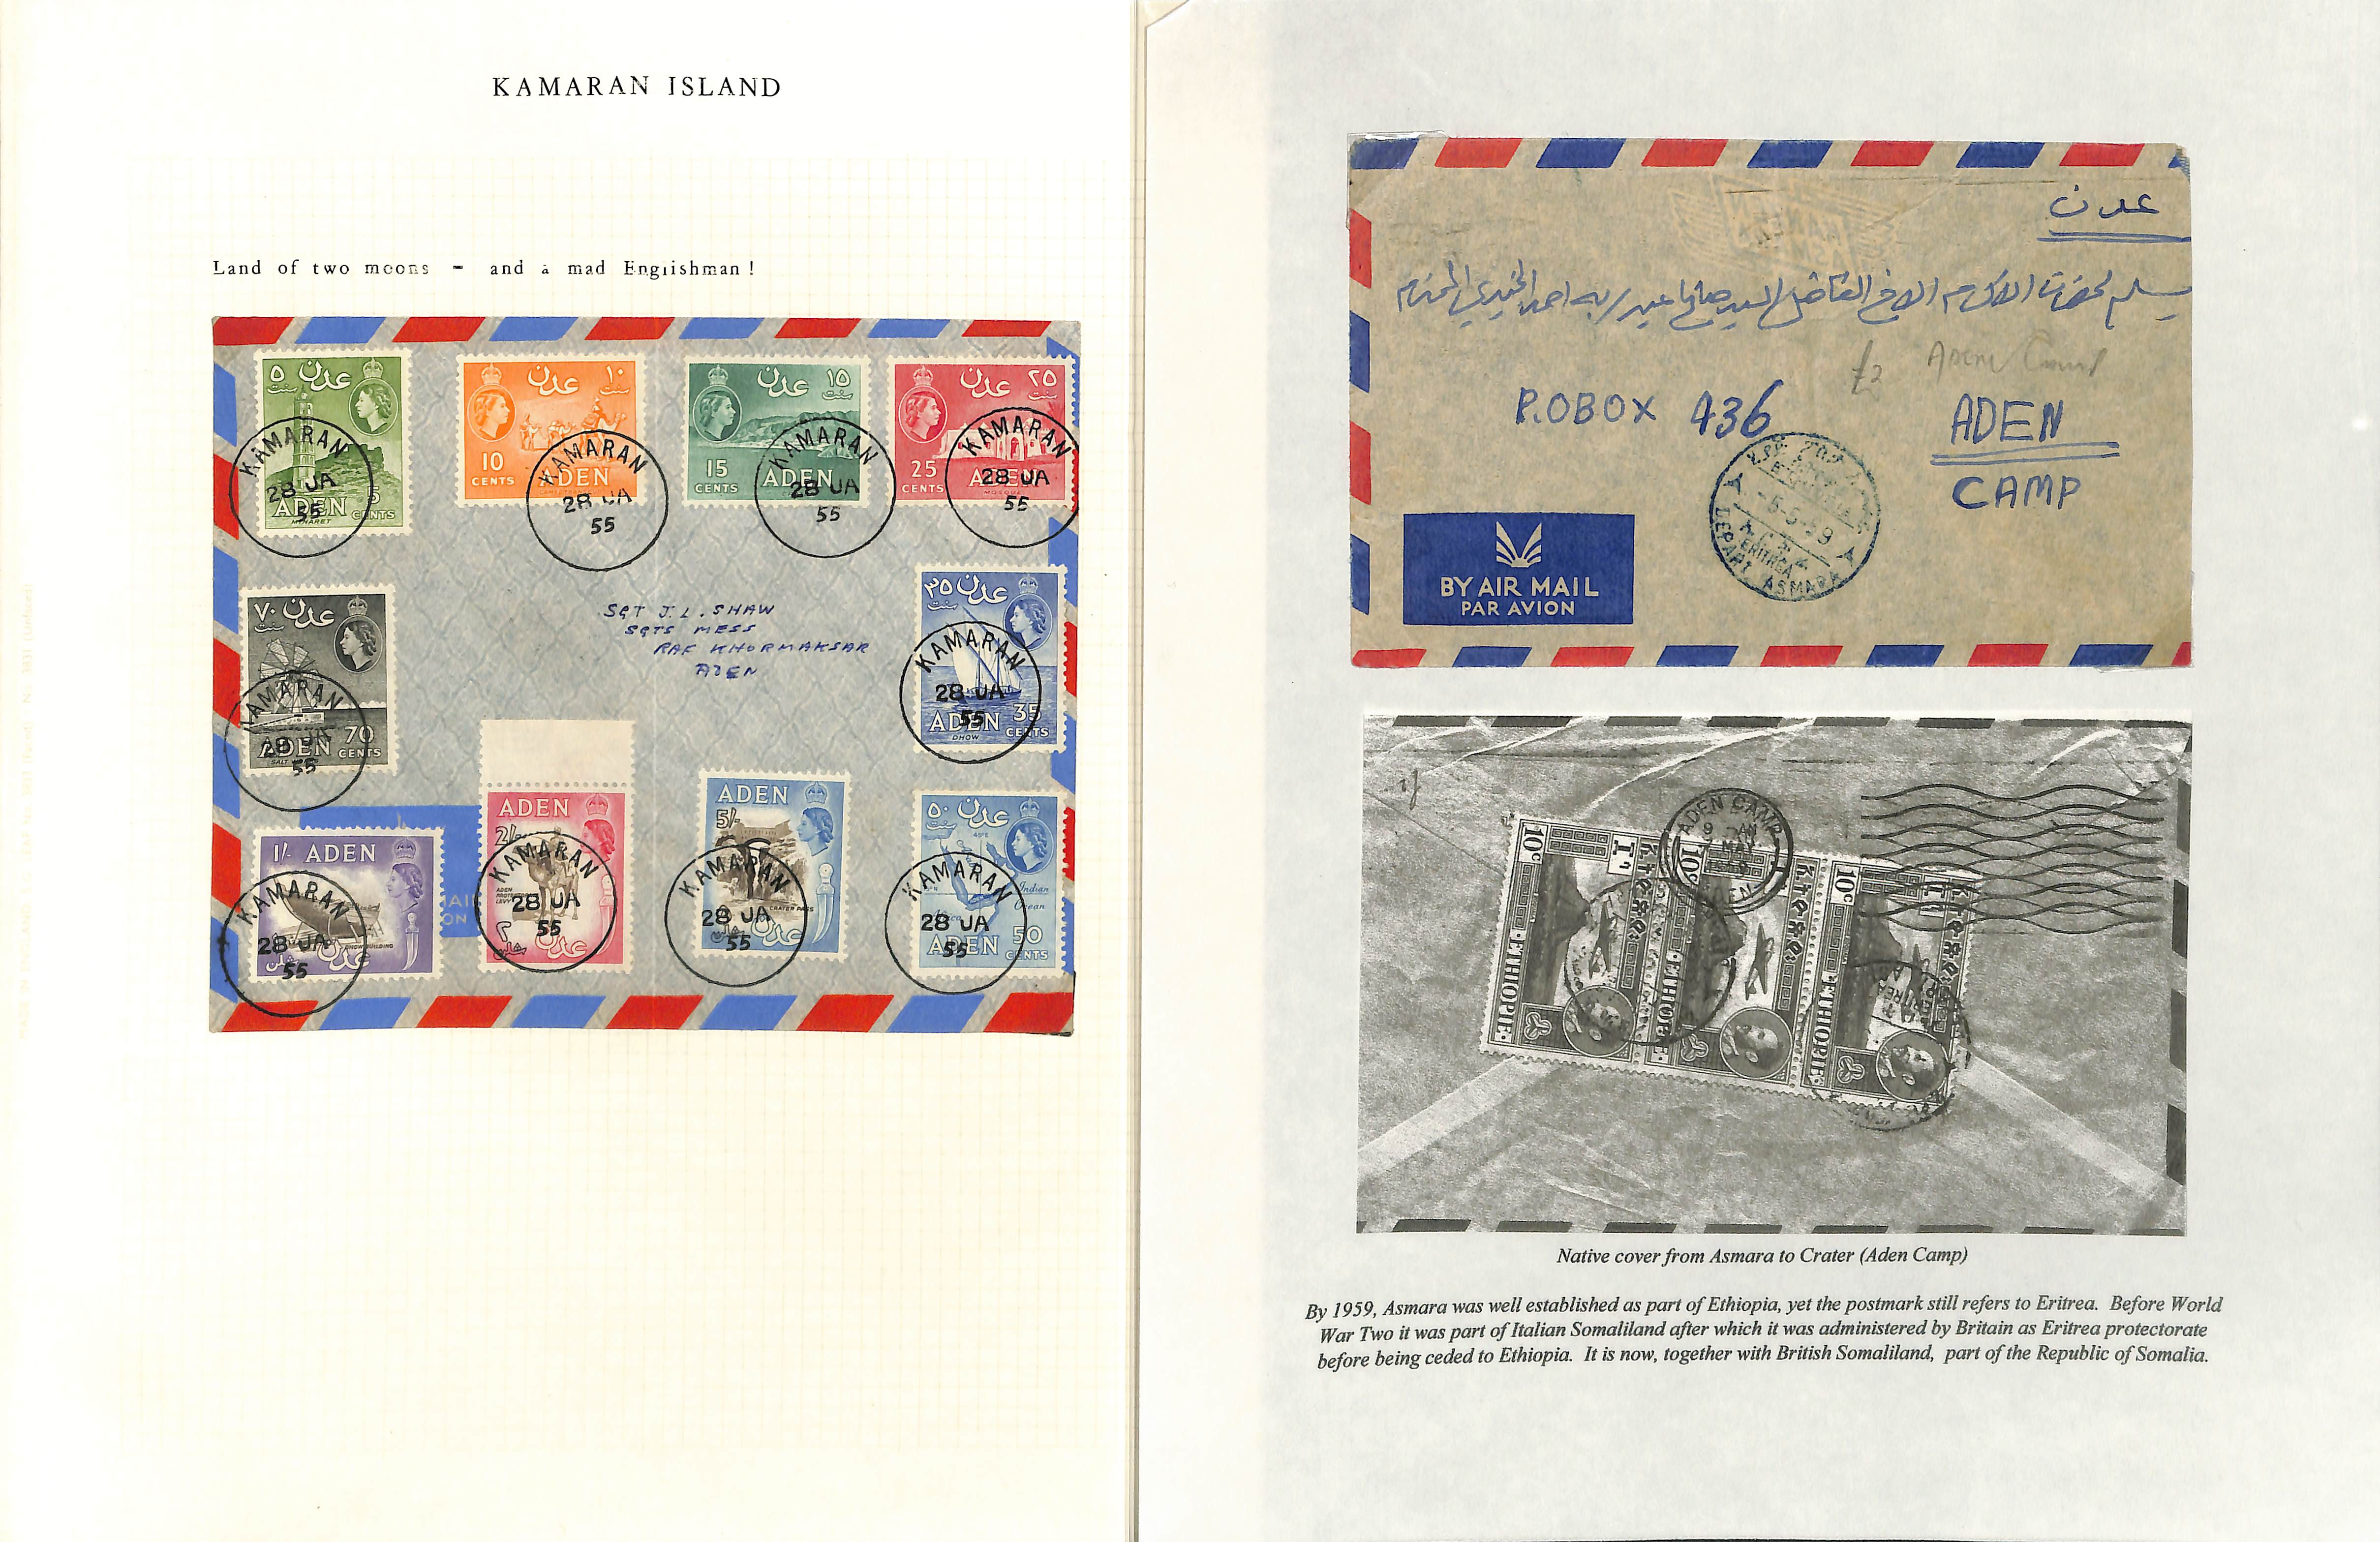 1905-63 Covers and cards including 1955-59 covers with Aden stamps cancelled at Maalla, Skeikh- - Image 3 of 5